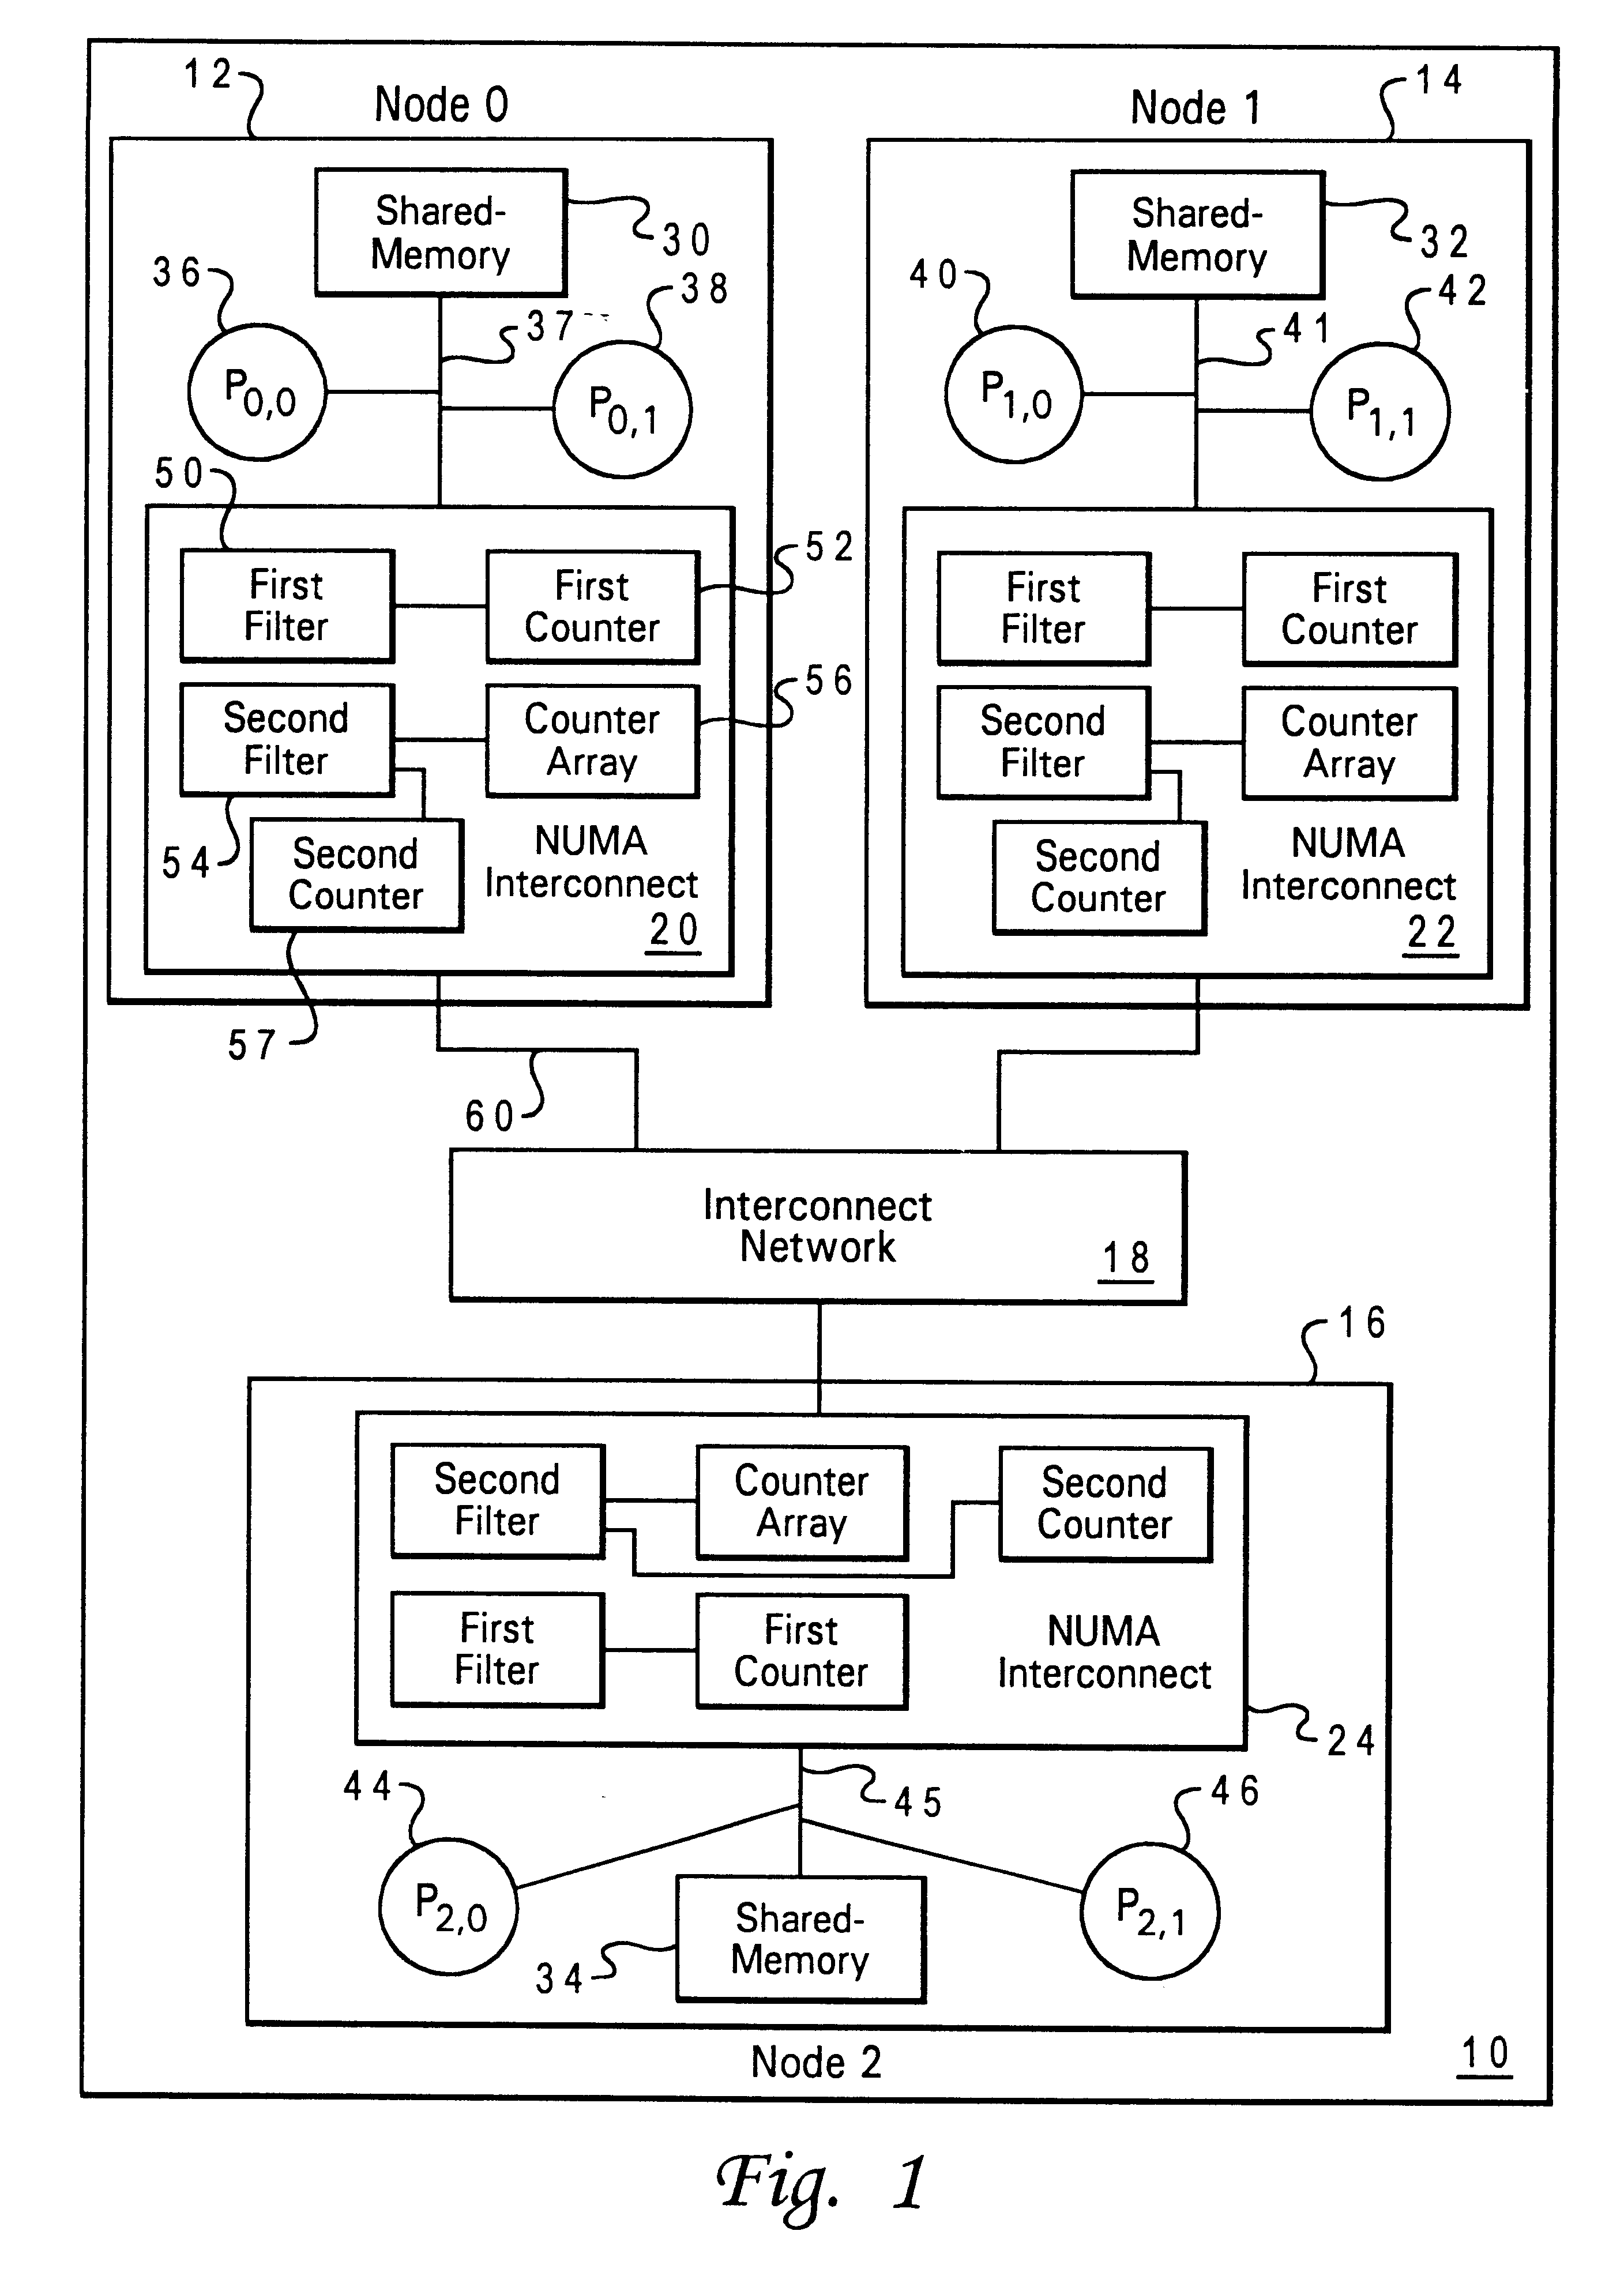 Method and system in a distributed shared-memory data processing system for determining utilization of shared-memory included within nodes by a designated application